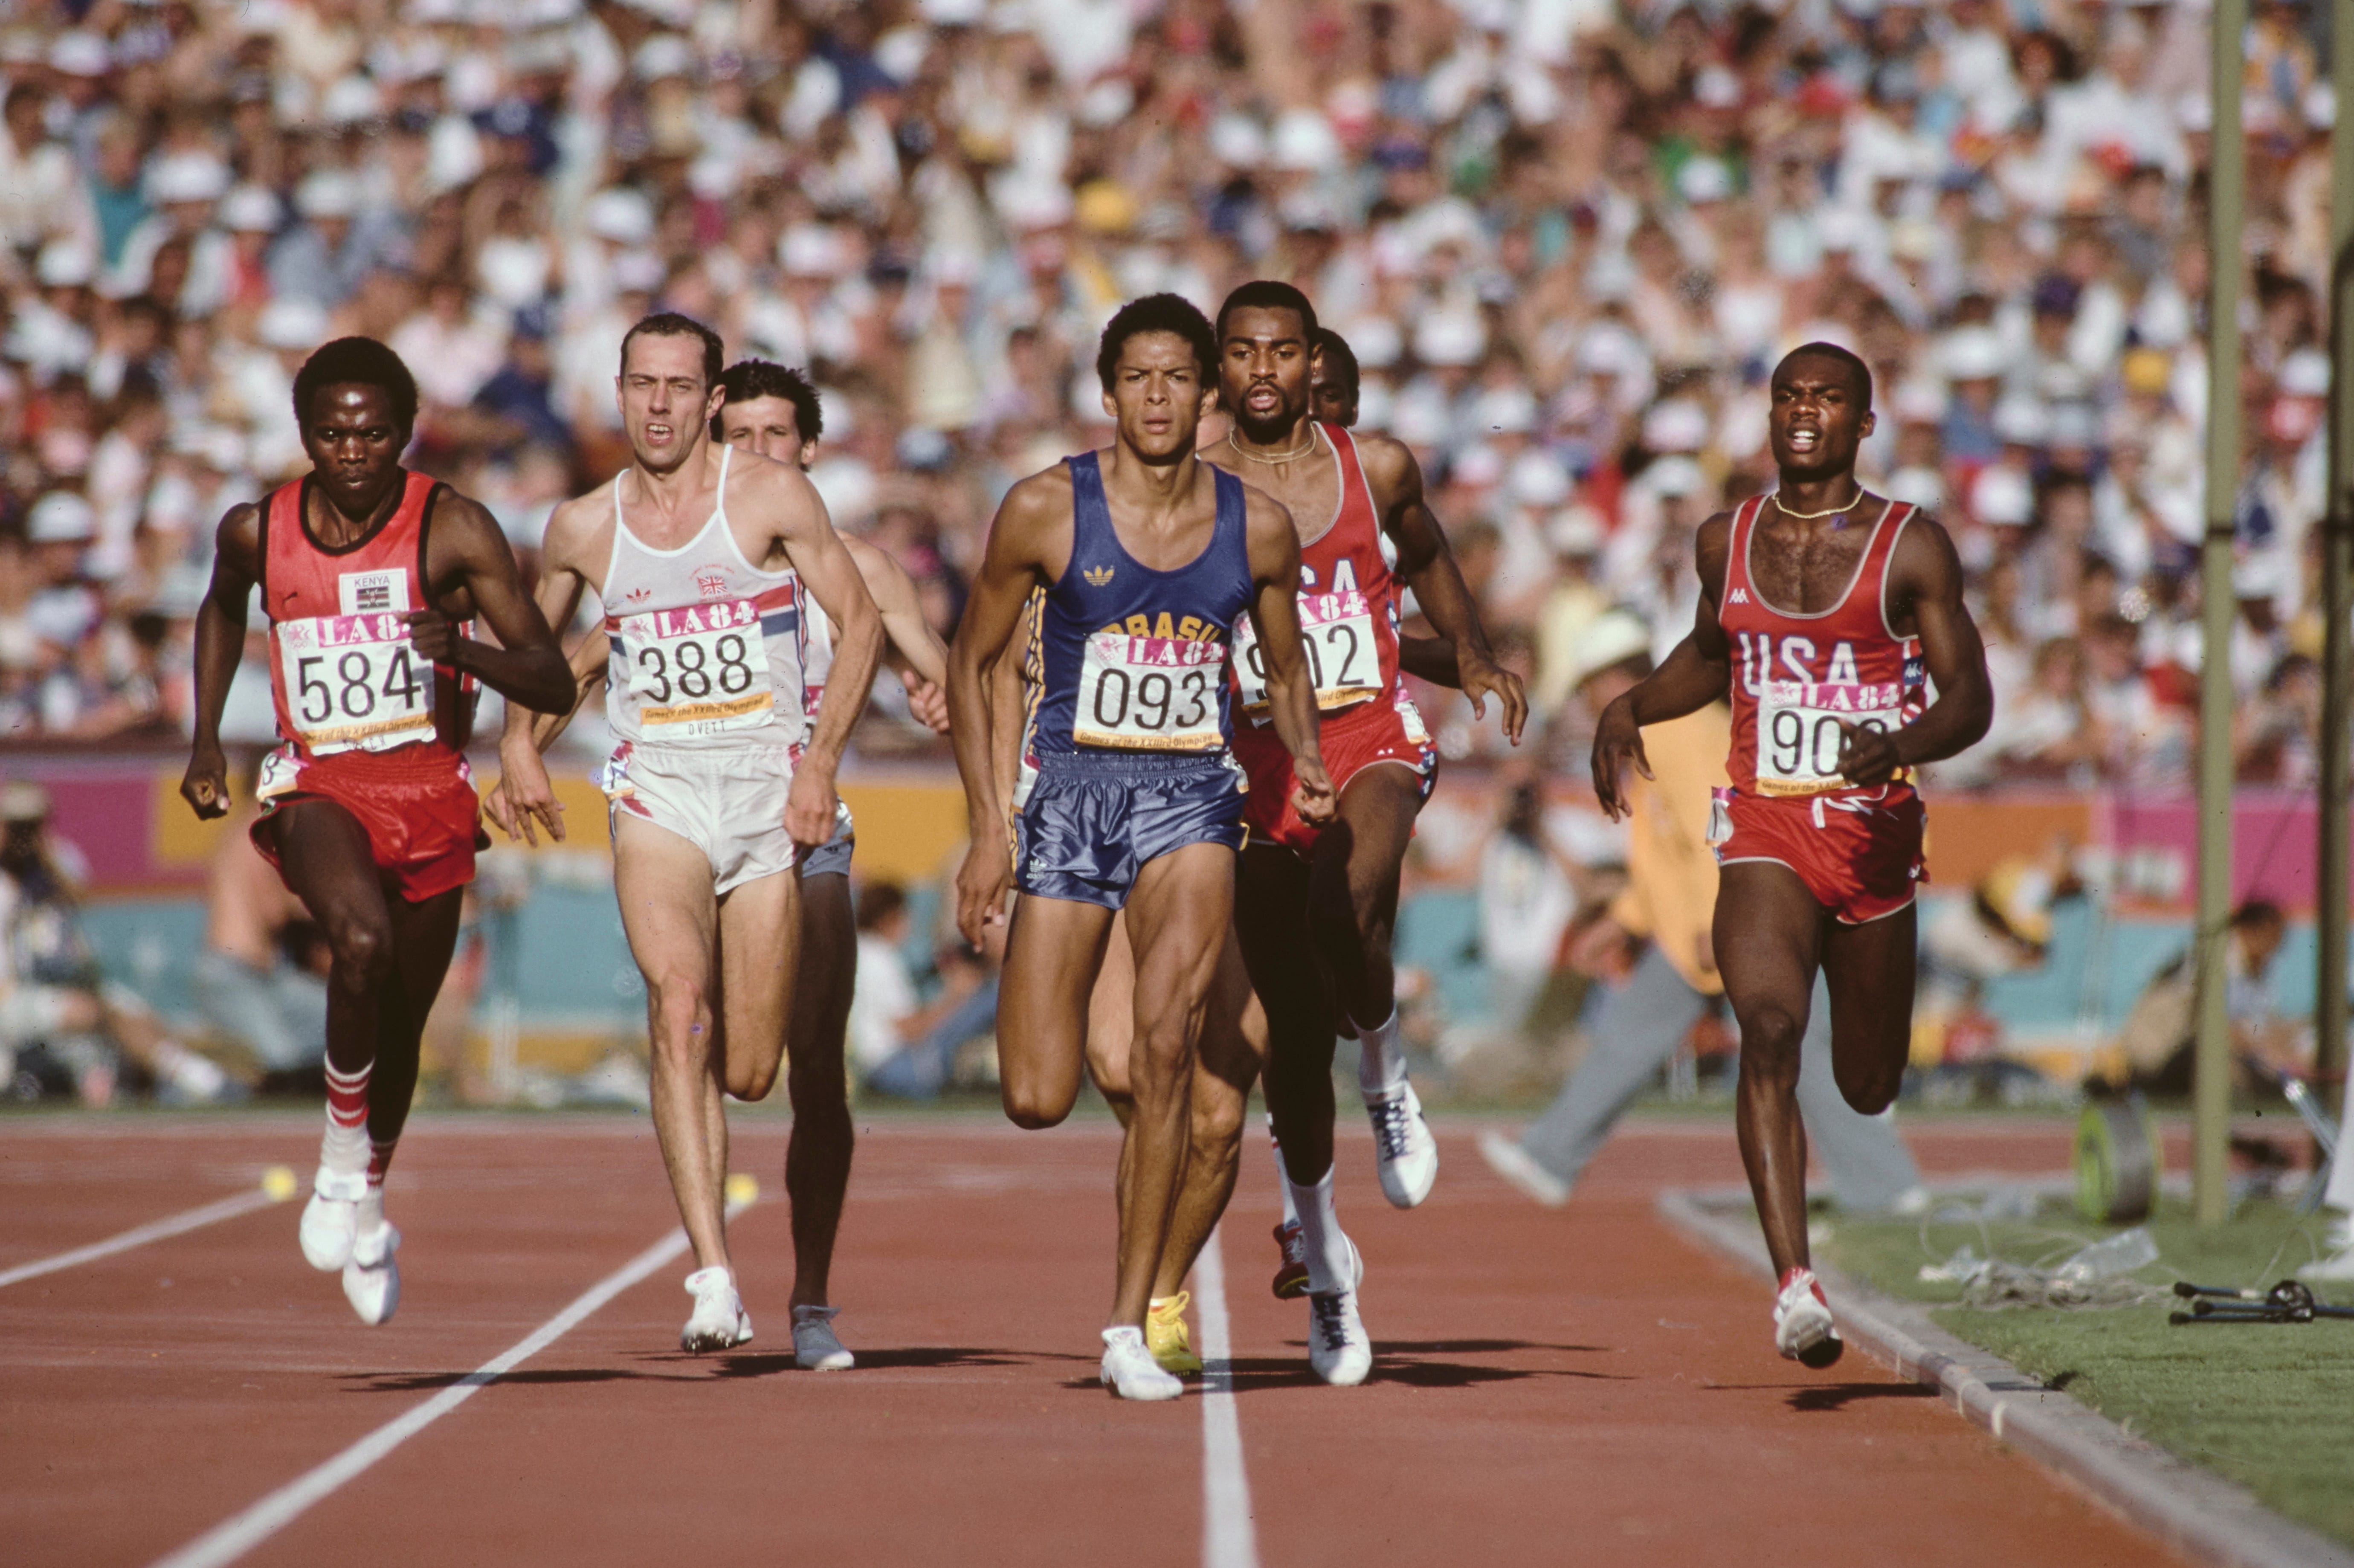 Gold medalist Joaquim Cruz #093 from Brazil leads from Edwin Koech #584 of Kenya, Steve Ovett #388 of Great Britain and Earl Jones #909 of the United States running in the final of the Men's 800m metres race on 6th August 1984 during the XXIII Olympic Summer Games at the Los Angeles Memorial Coliseum in Los Angeles, California, United States.